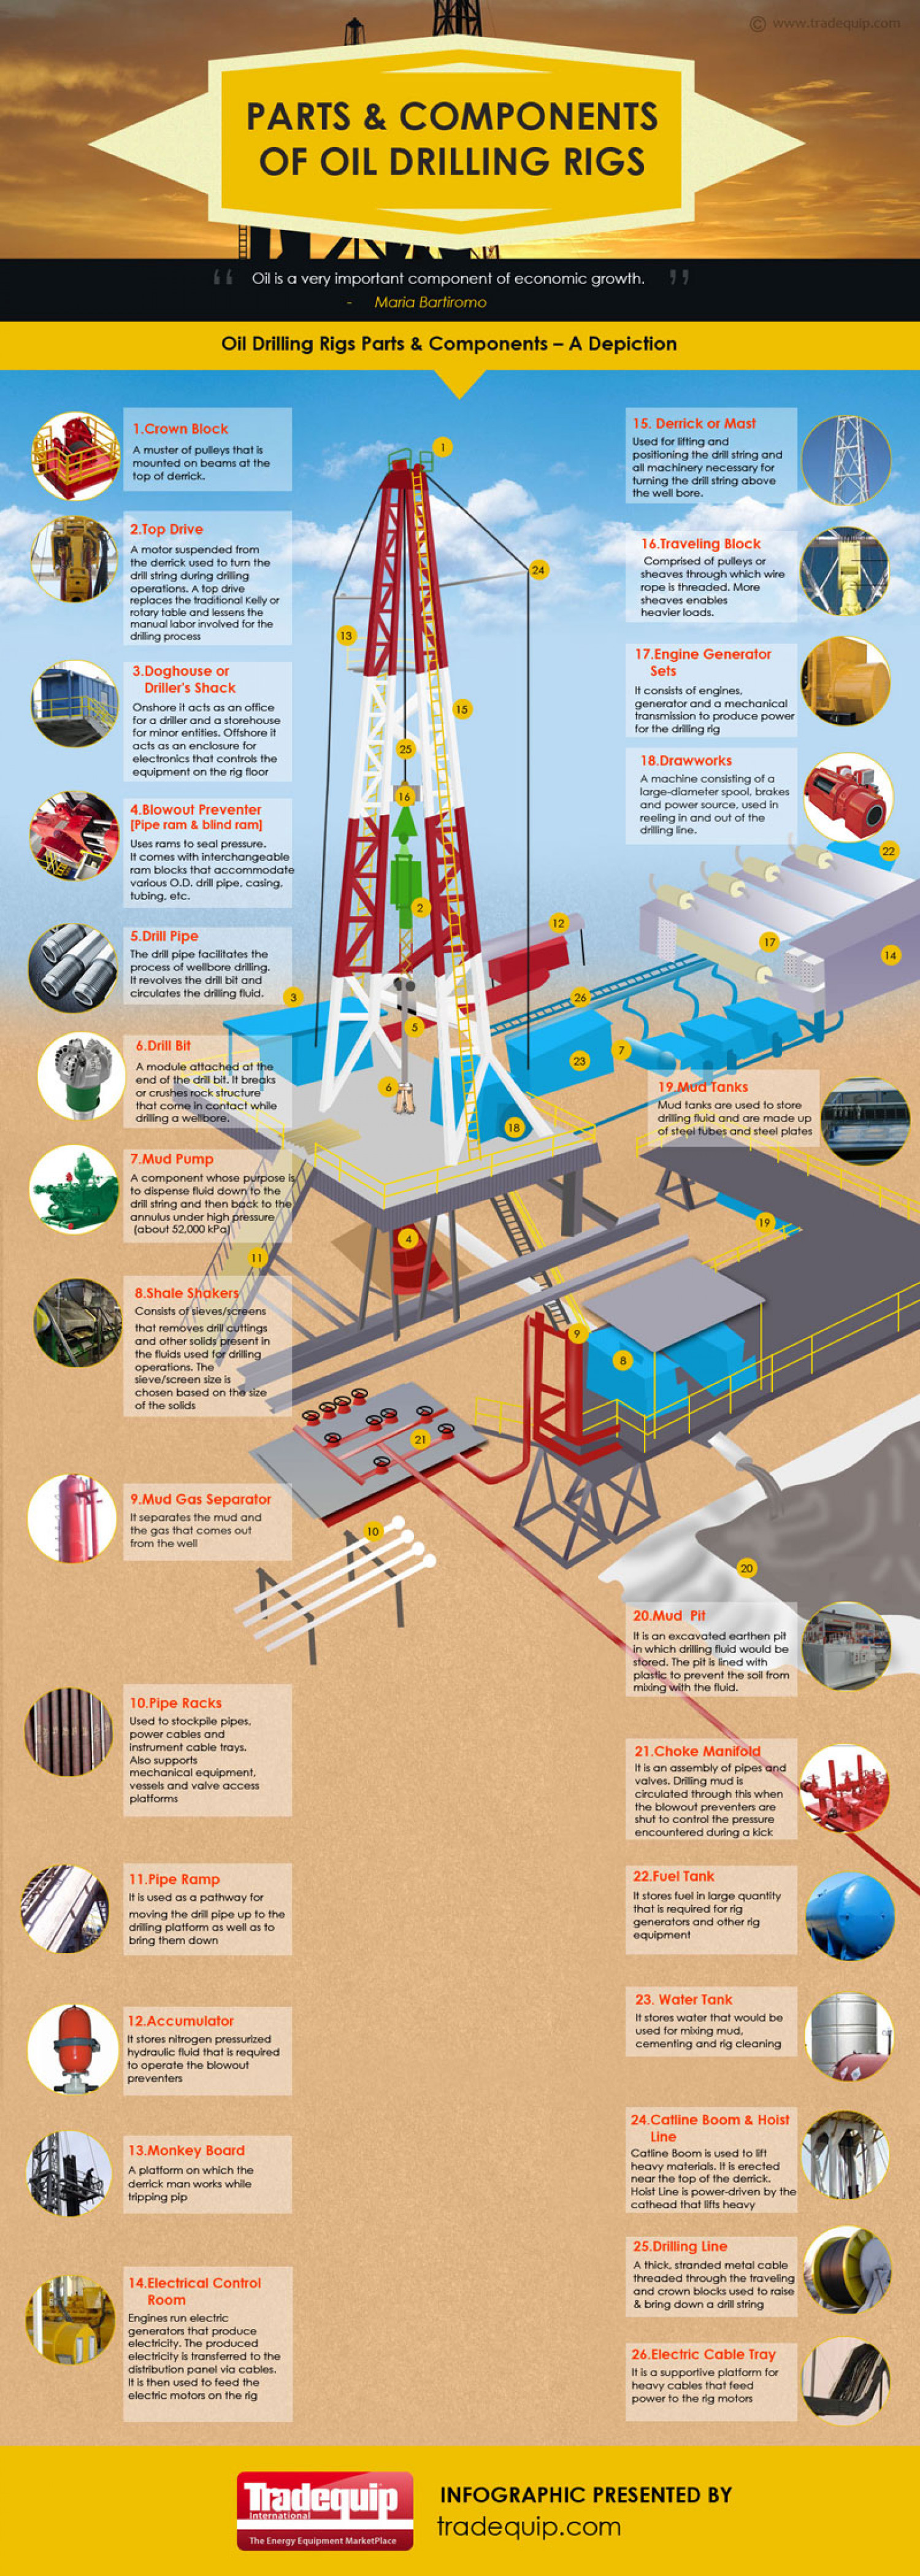 Parts & Components of Oil Drilling Rigs Infographic